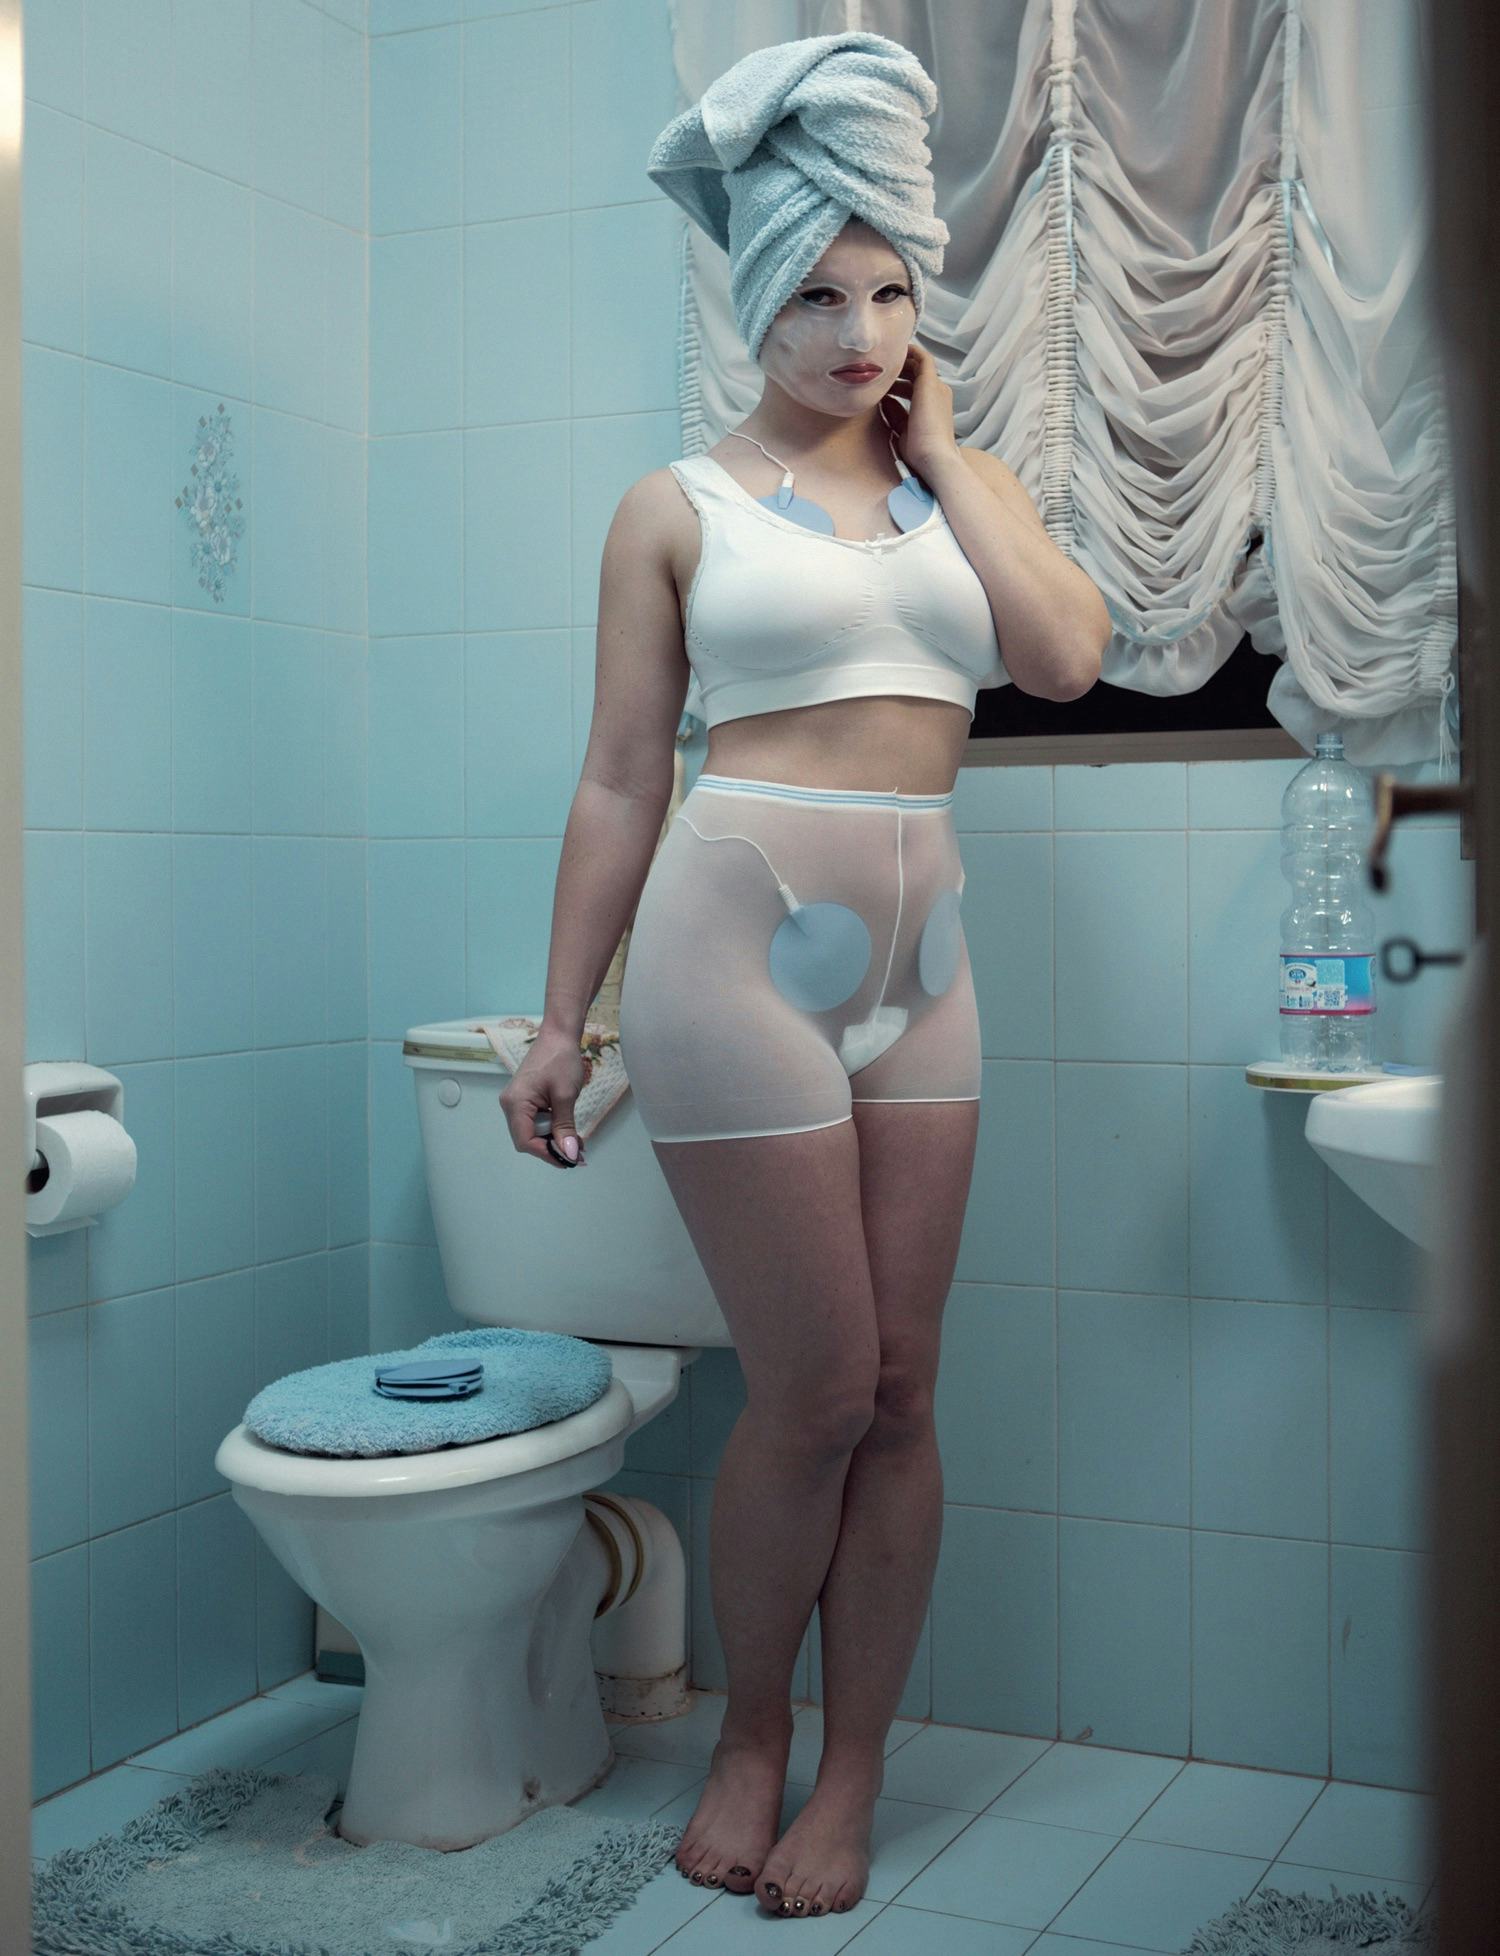 Page 212 from Foam Magazine #45: Talent - showing a self-portrait in a blue bathroom by Juno Calypso